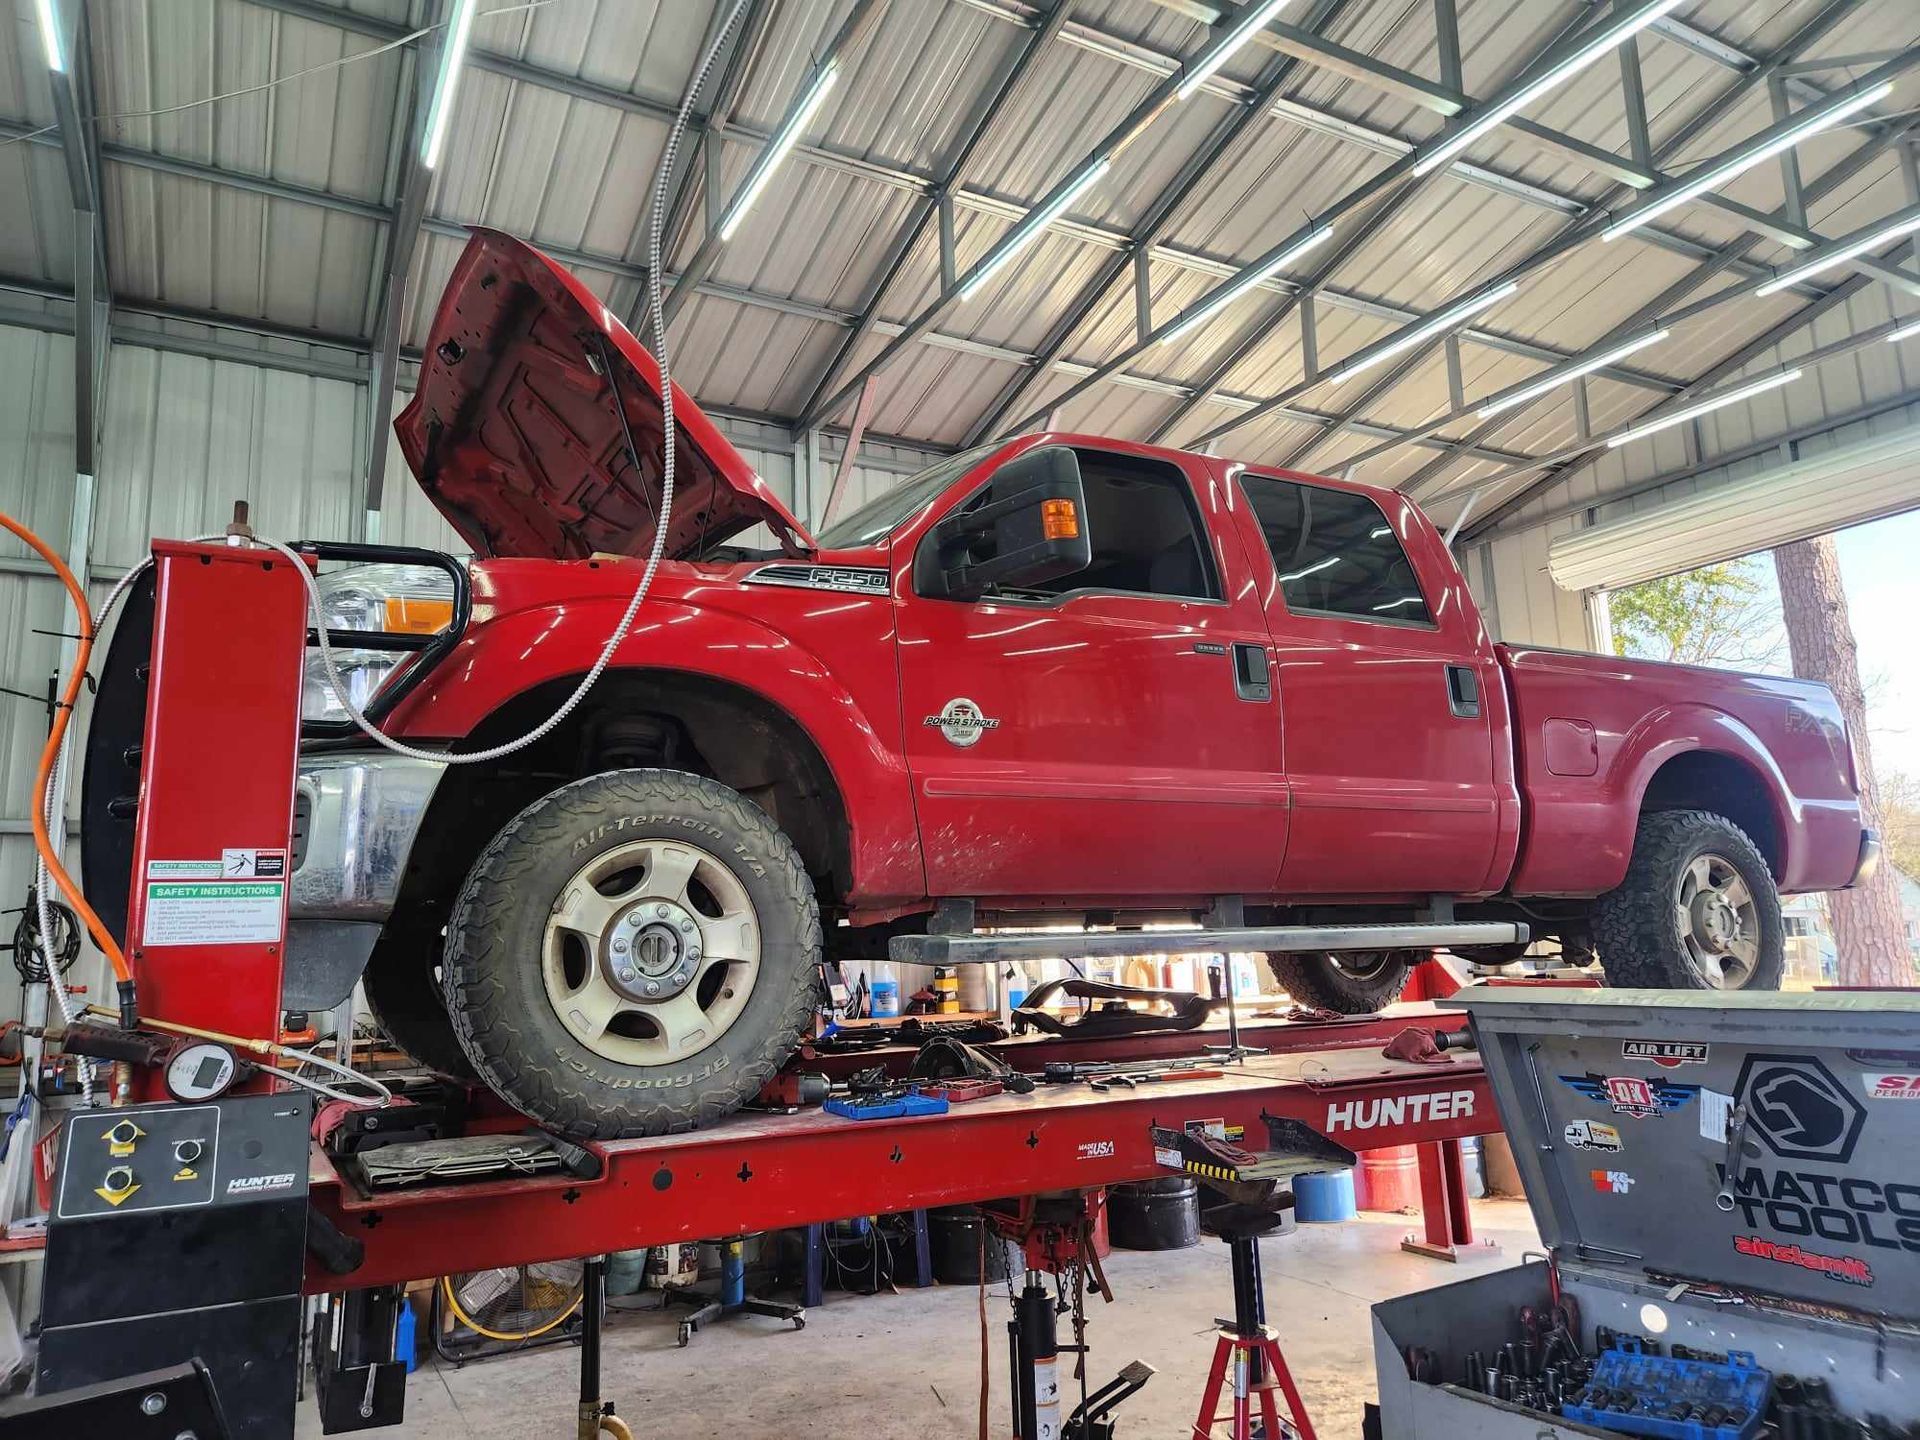 A red truck is sitting on top of a lift in a garage.